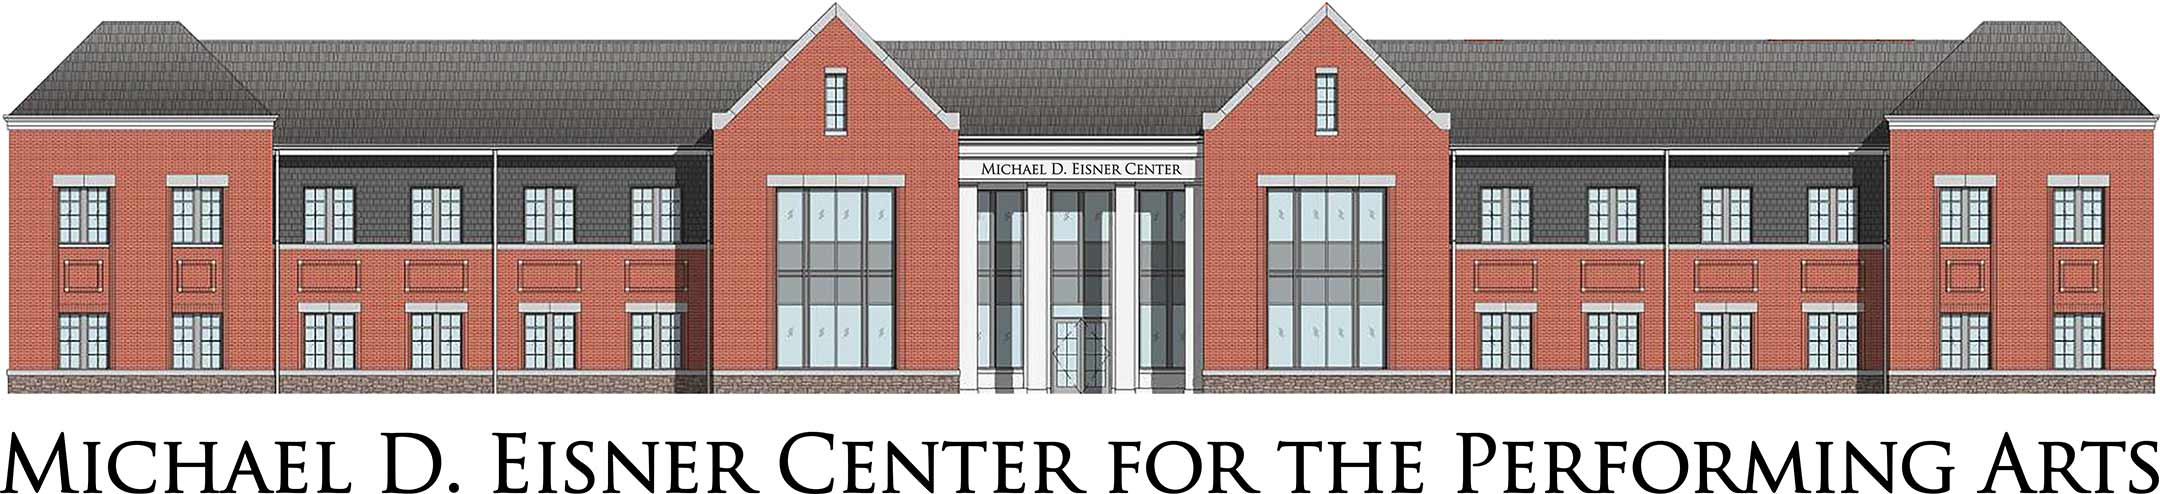 An illustration of the Michael D. Eisner Center for the Performing Arts